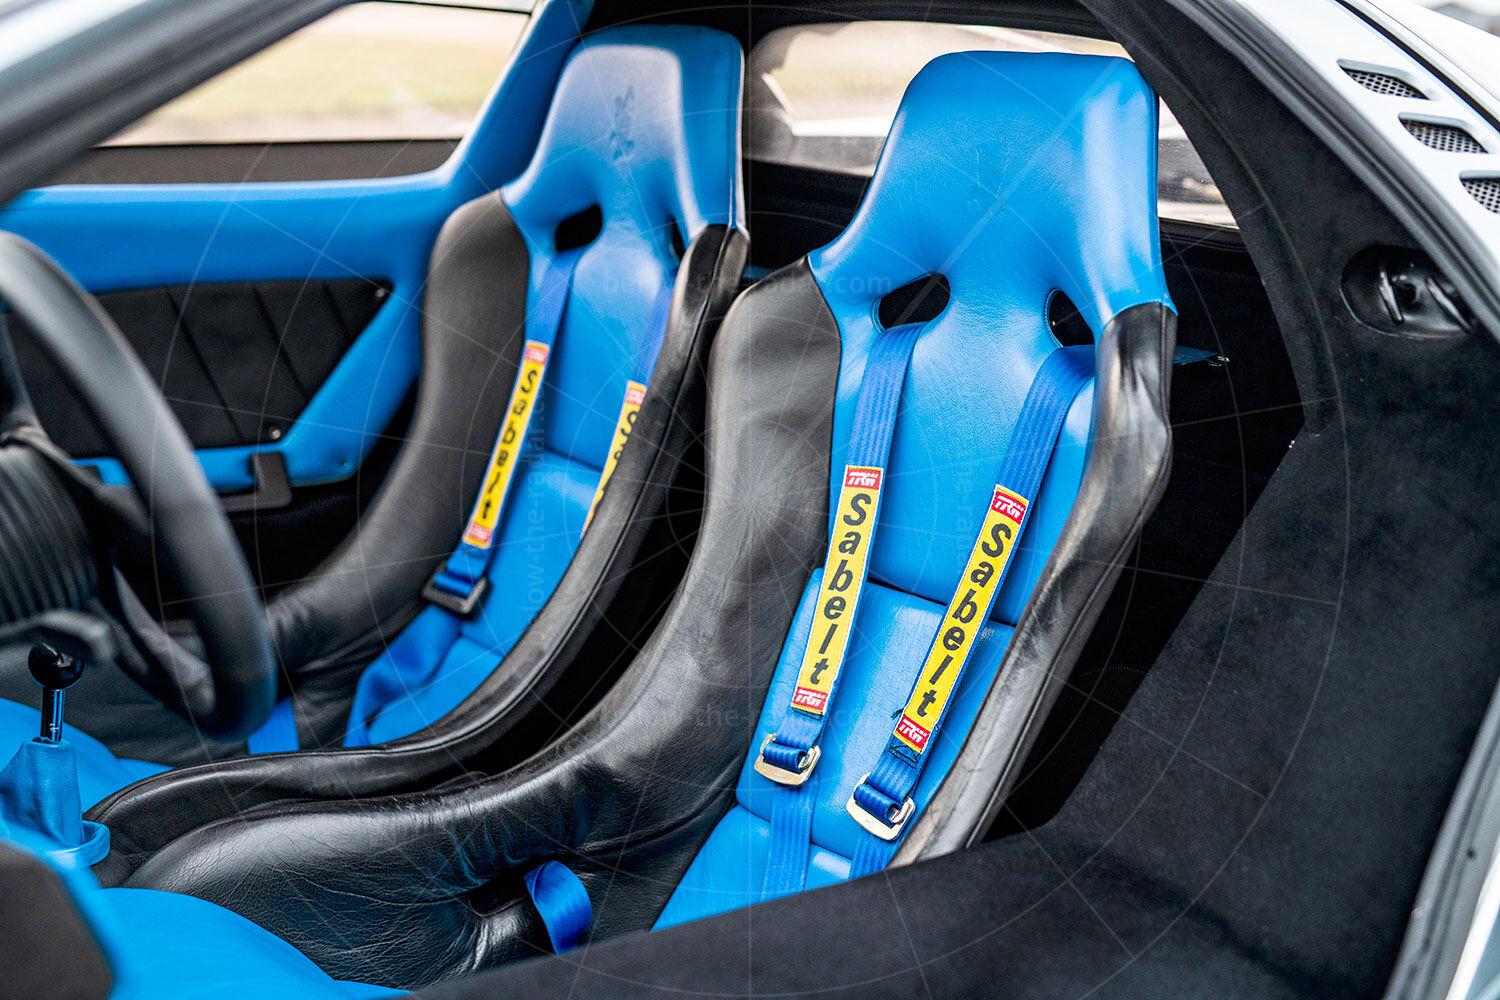 Isdera Commendatore 112i seats Pic: RM Sotheby's | Isdera Commendatore 112i seats